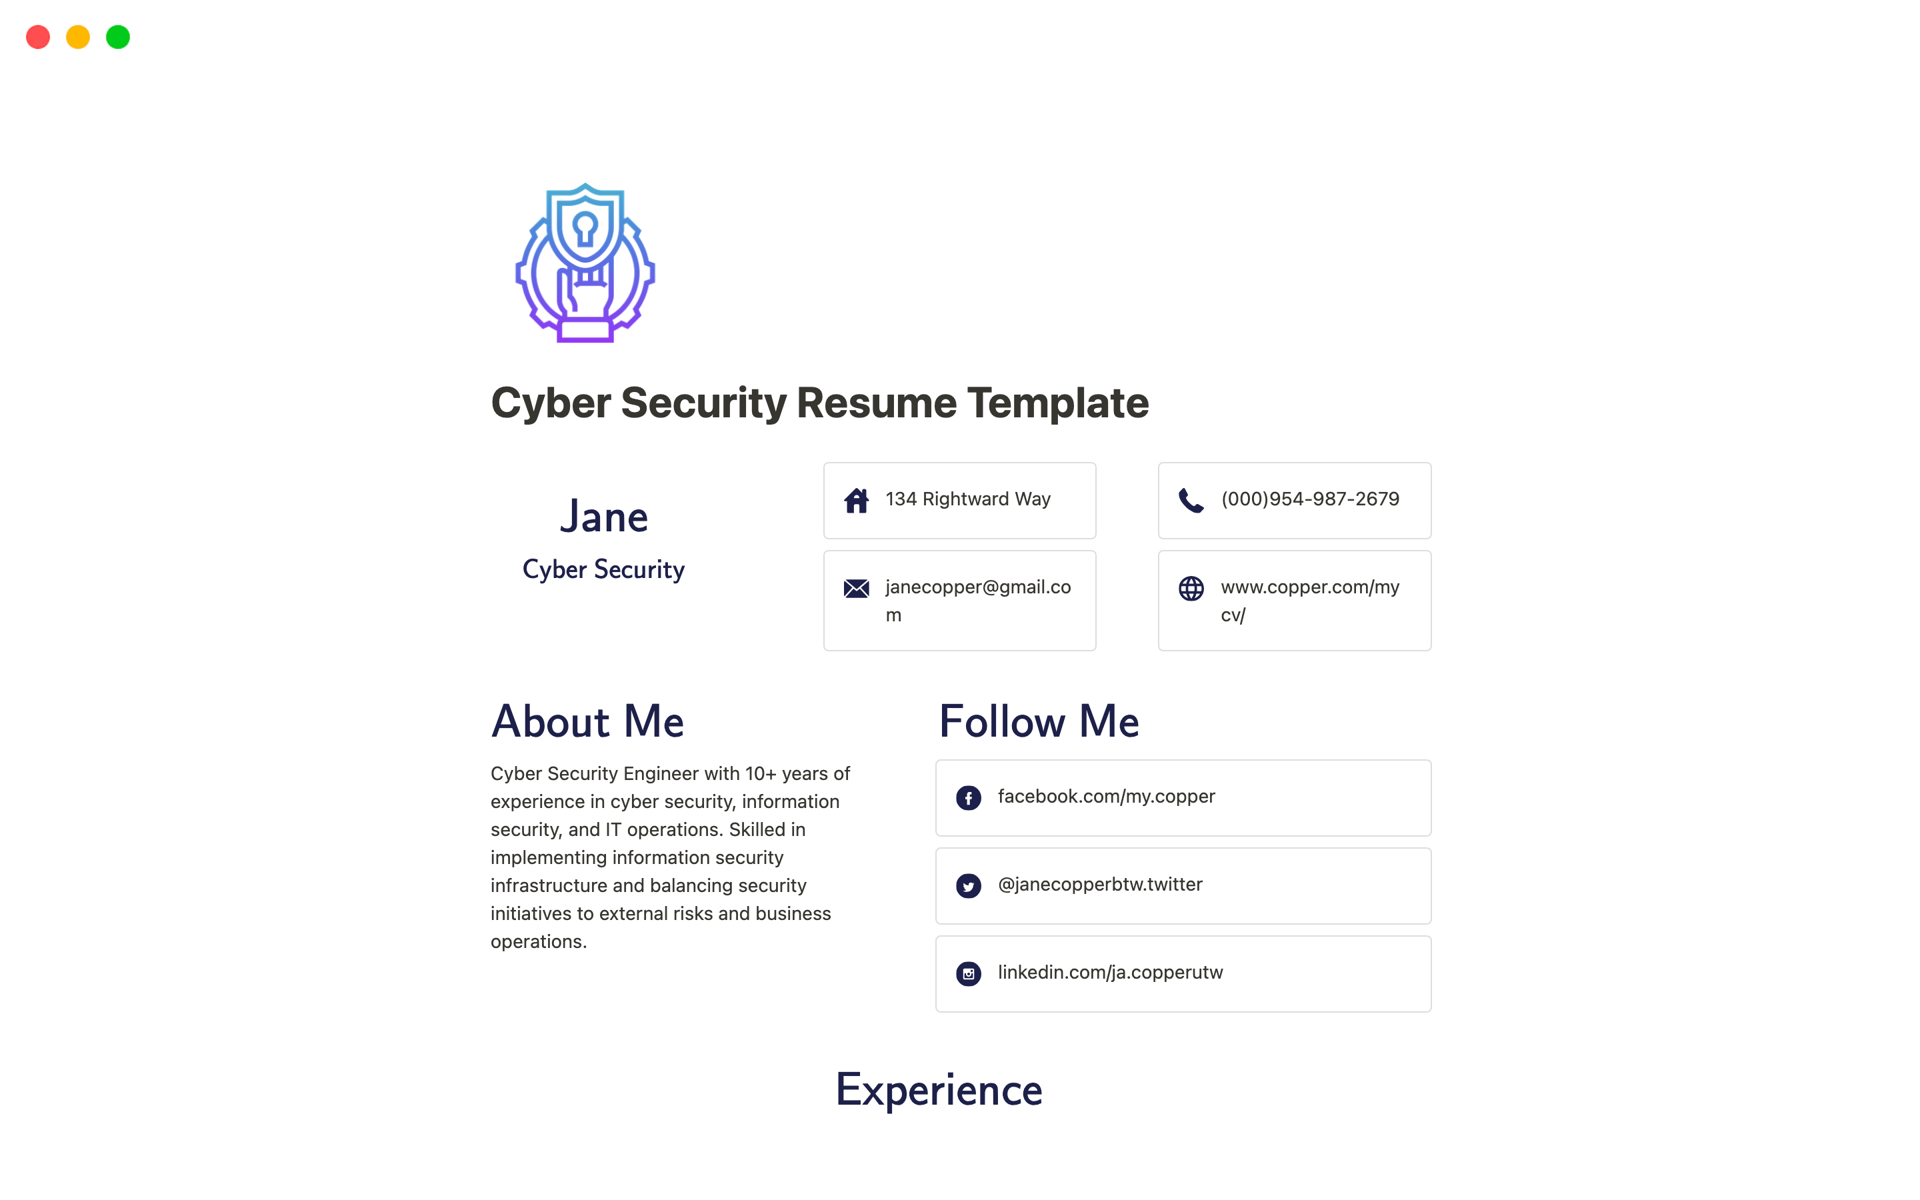 🔒 Cyber Security Odyssey: Security Sentinel Edition 🌟
Embark on a security odyssey with our Cyber Security Resume Template, meticulously crafted to guide you through showcasing your skills and experiences.